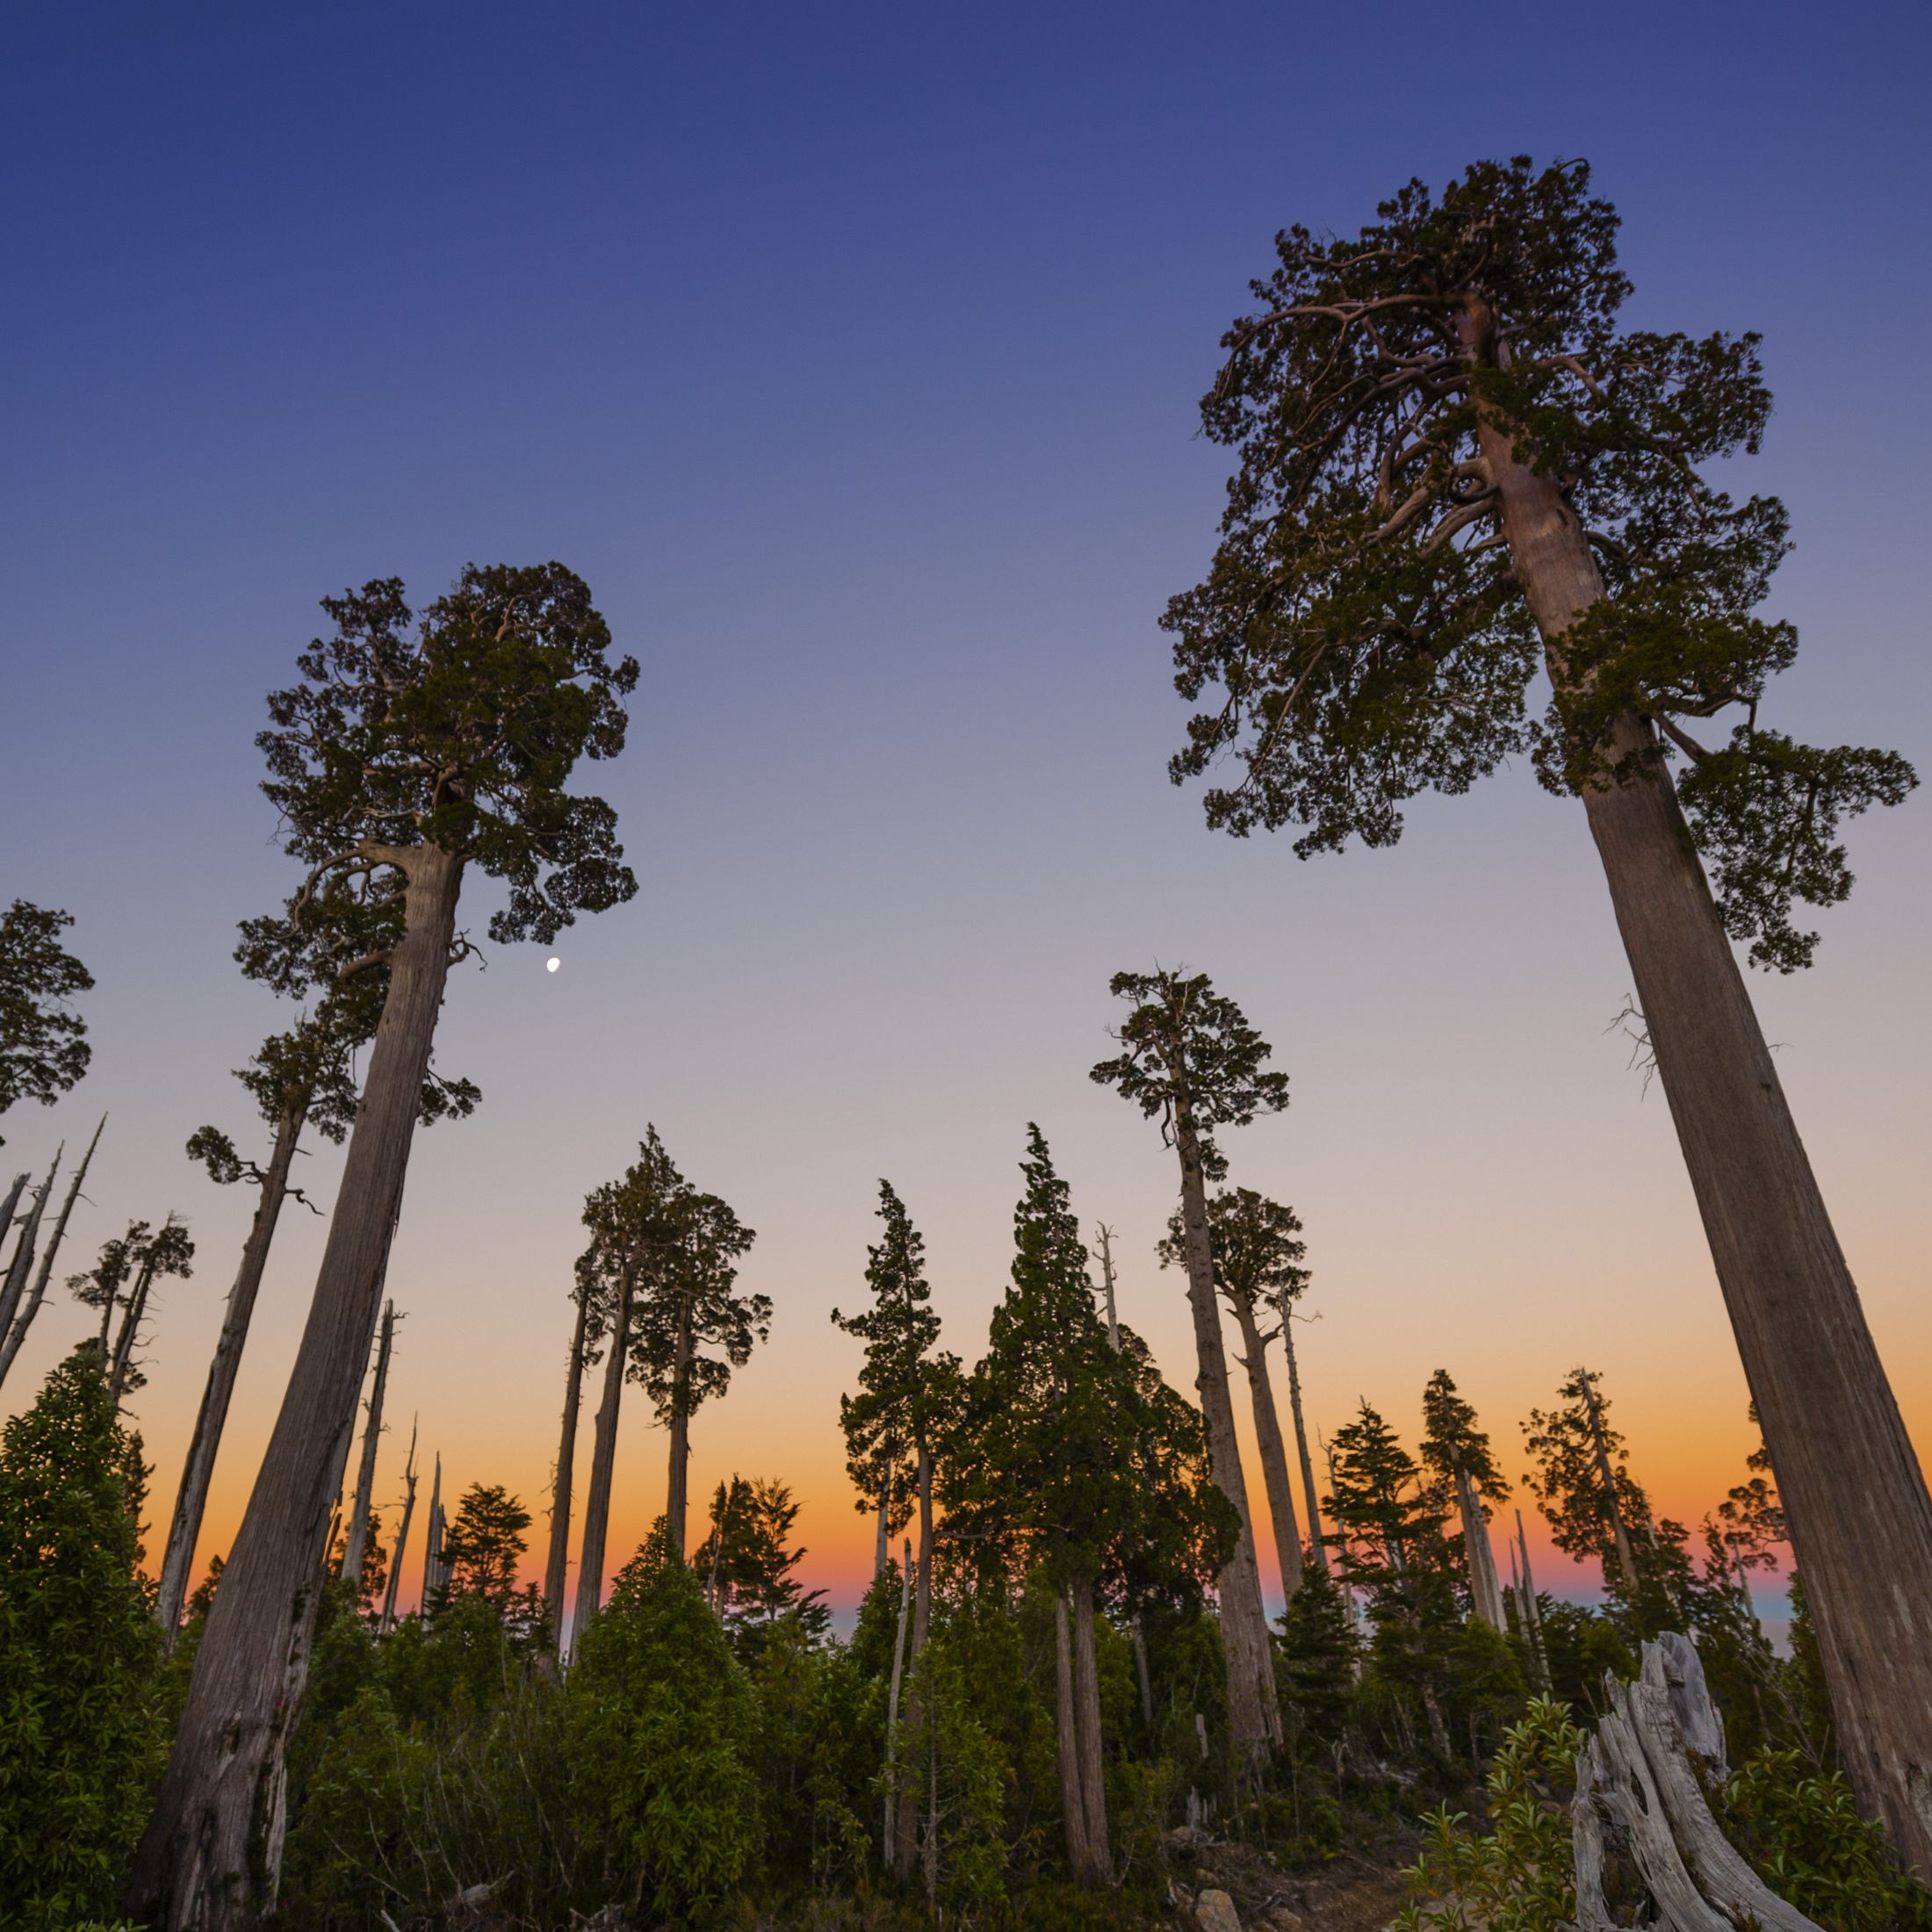 A view of large, coniferous trees reaching towards the sky with an ombre of colorful sunset in the background.